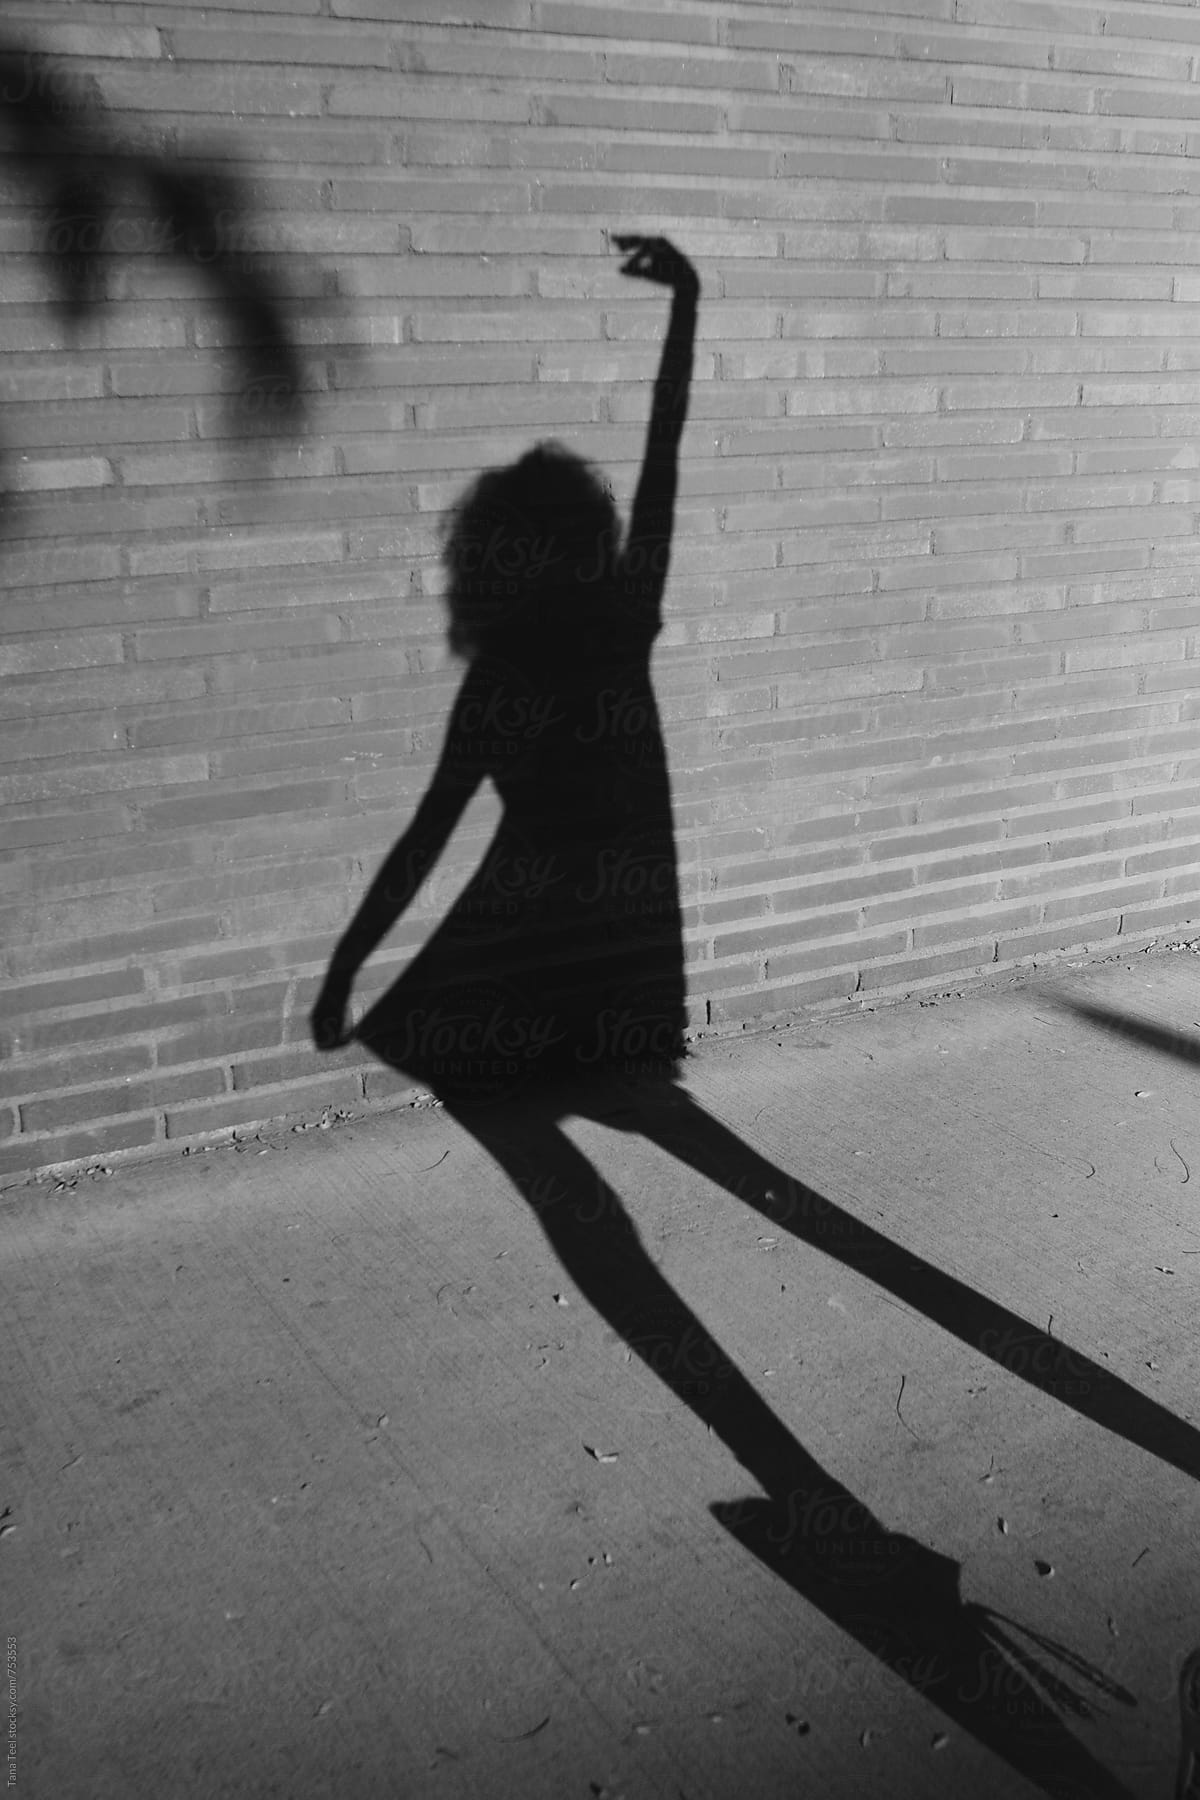 Shadow of female in dress falls on brick wall of building